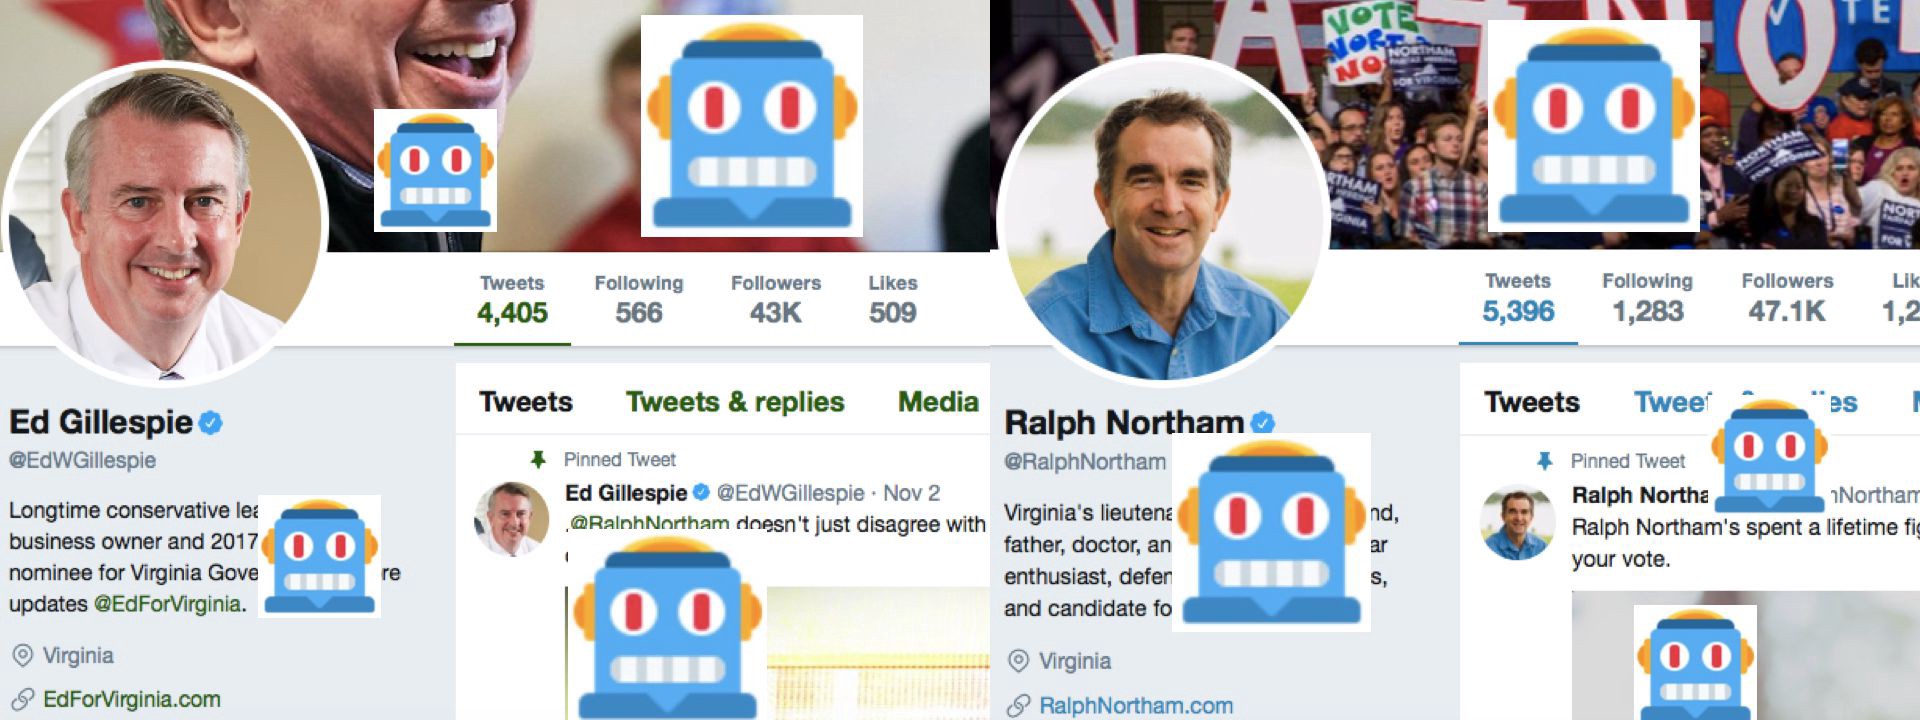 #ElectionWatch: Bots in Virginia?